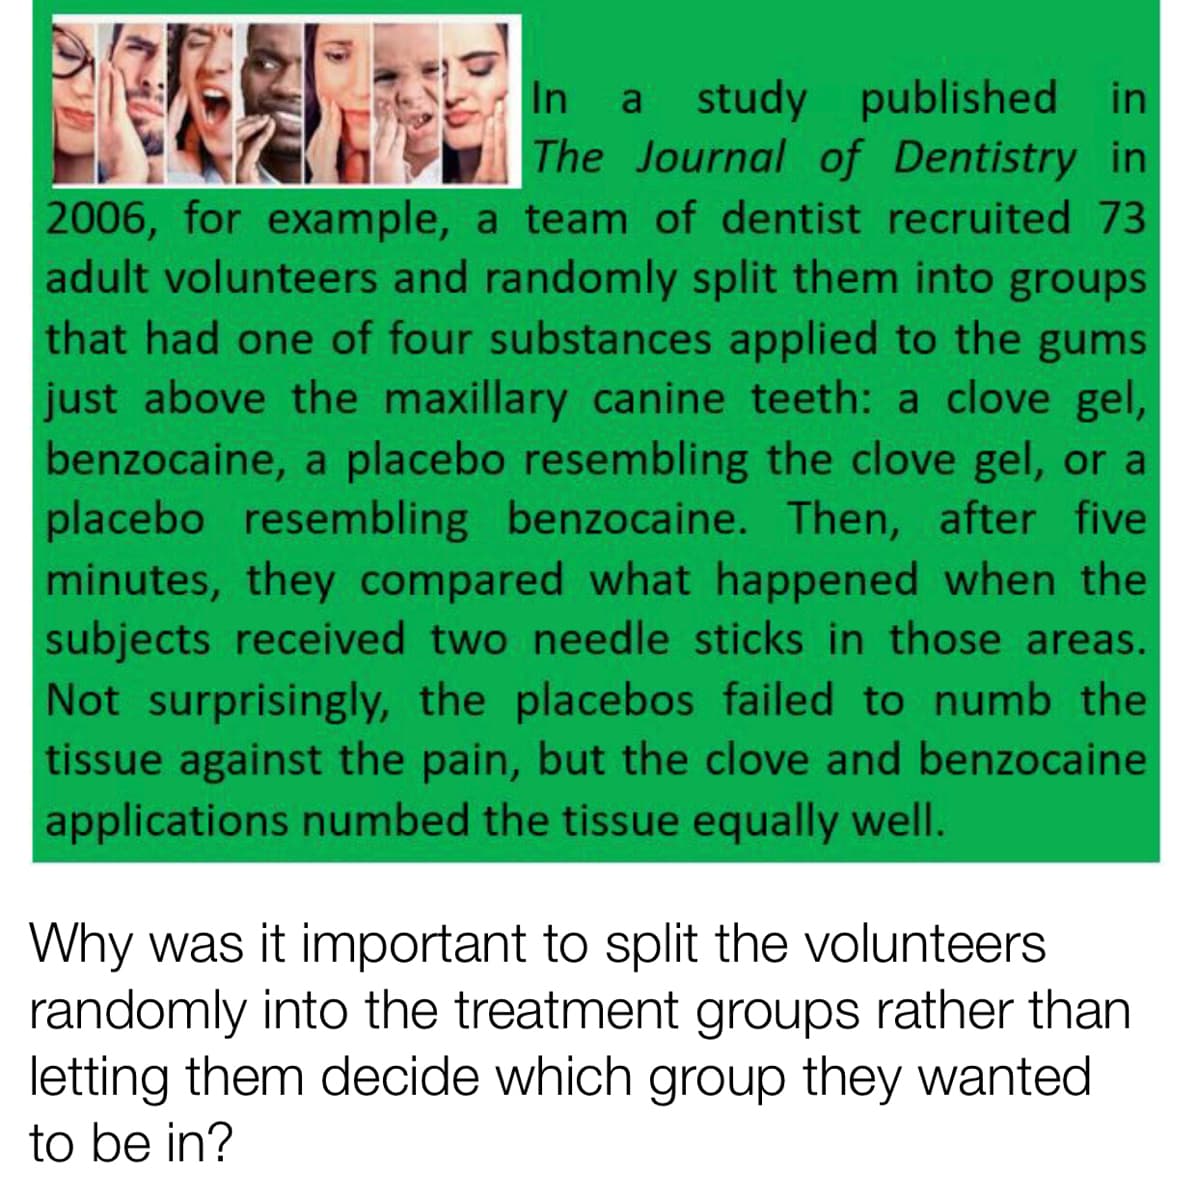 a study published in
The Journal of Dentistry in
2006, for example, a team of dentist recruited 73
adult volunteers and randomly split them into groups
that had one of four substances applied to the gums
just above the maxillary canine teeth: a clove gel,
benzocaine, a placebo resembling the clove gel, or a
placebo resembling benzocaine. Then, after five
minutes, they compared what happened when the
subjects received two needle sticks in those areas.
Not surprisingly, the placebos failed to numb the
tissue against the pain, but the clove and benzocaine
applications numbed the tissue equally well.
Why was it important to split the volunteers
randomly into the treatment groups rather than
letting them decide which group they wanted
to be in?
